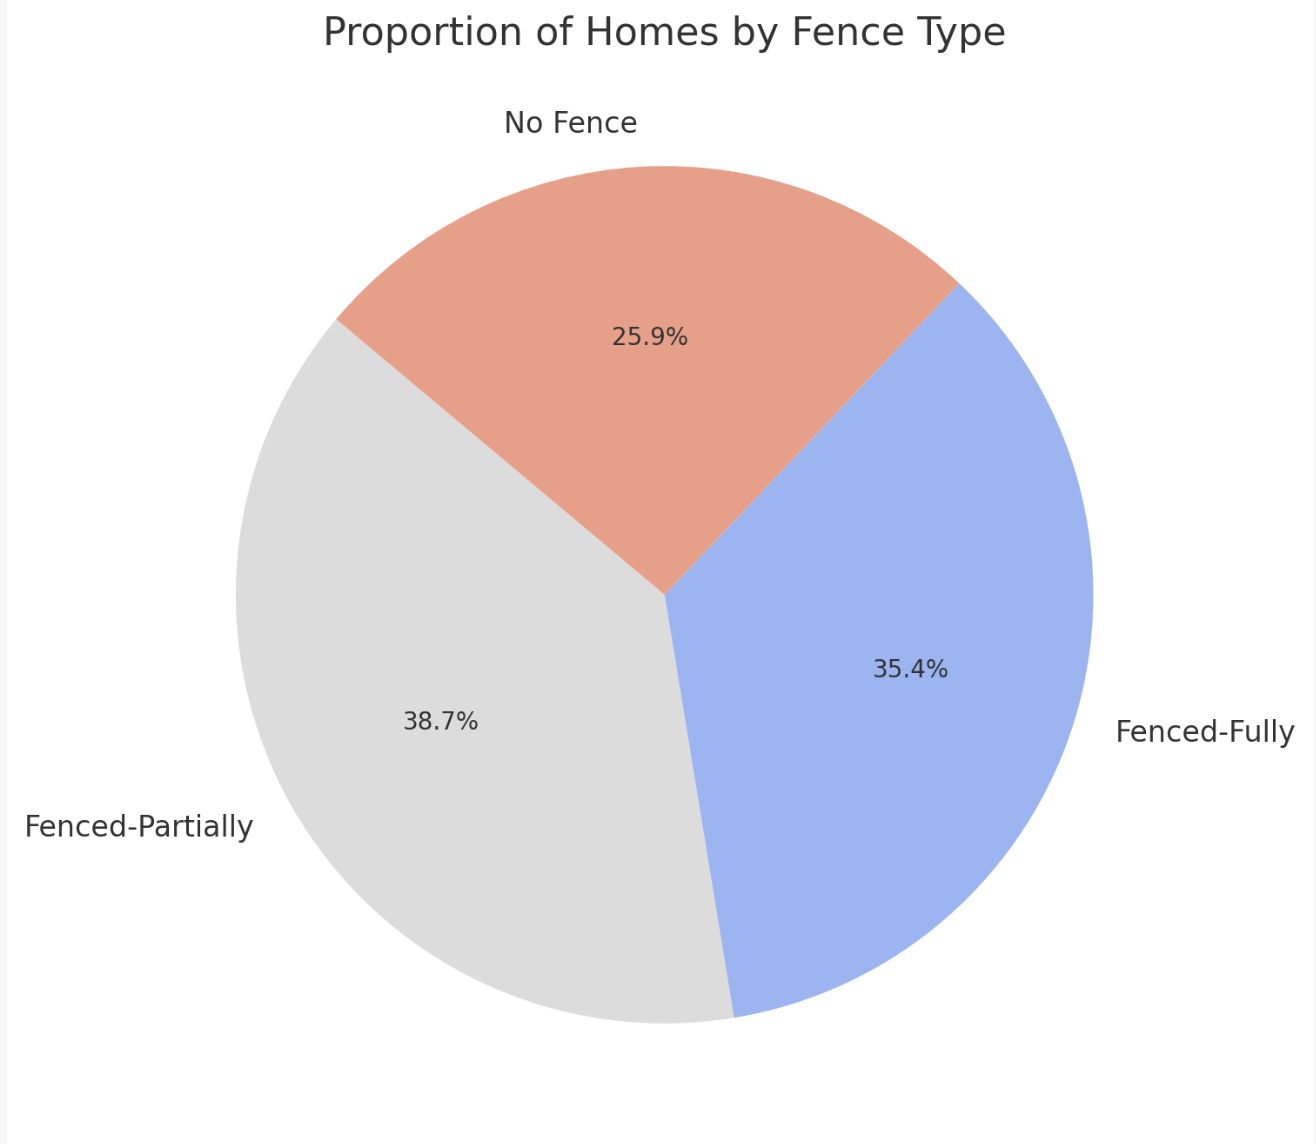 Pie Chart displaying the Proportion of Homes by Fence Type